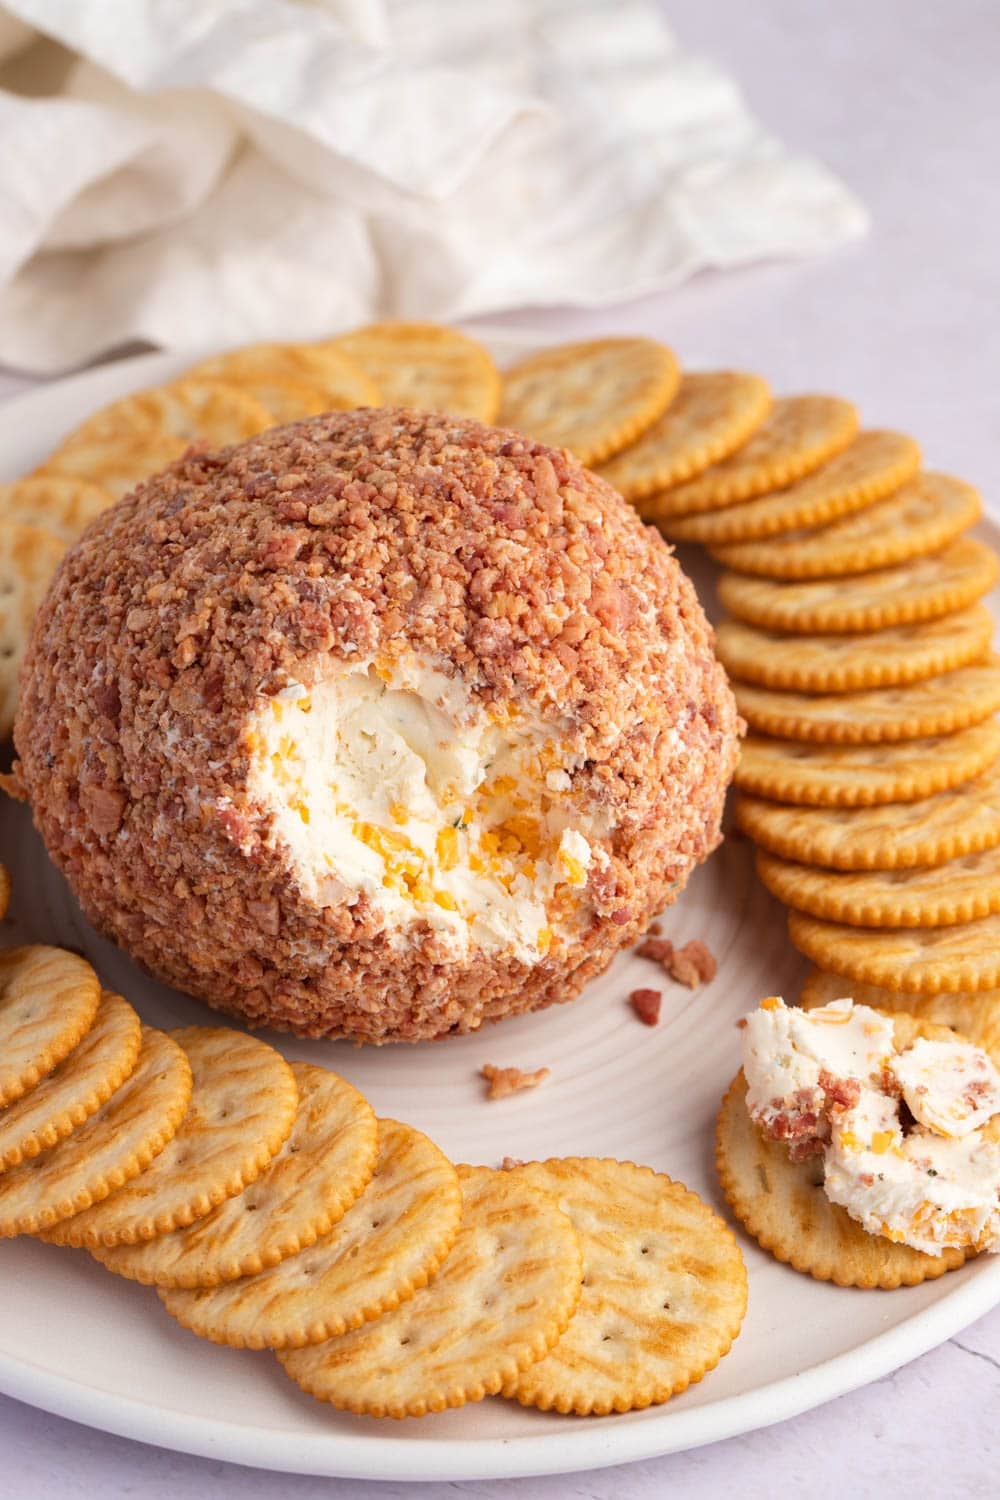 Savory and Sumptious Bacon Ranch Cheese Ball with Crackers